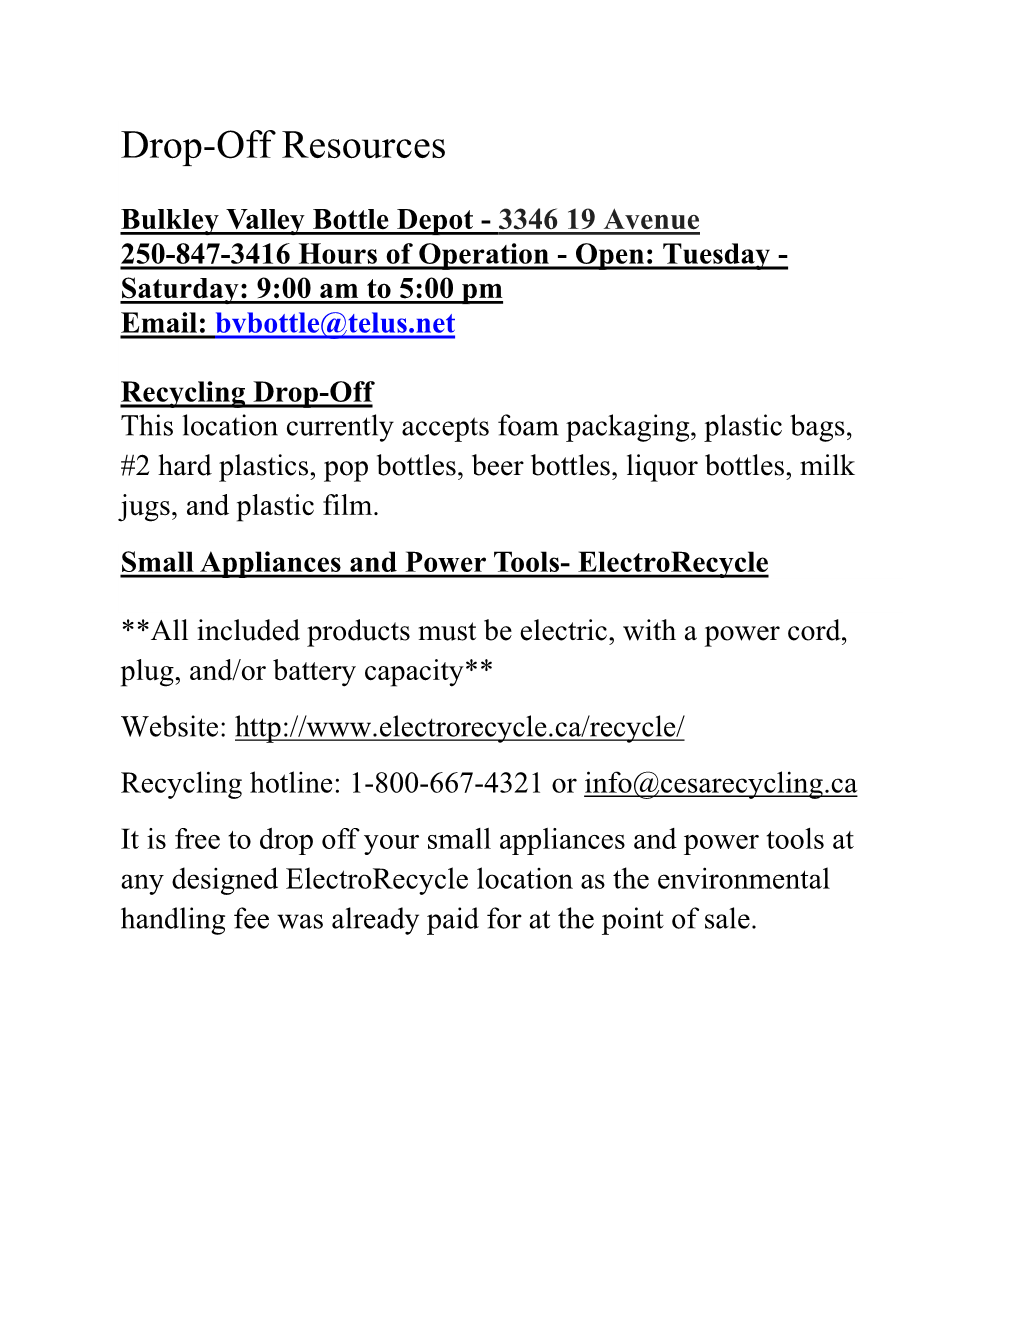 Town of Smithers Recycling Drop-Off Resources